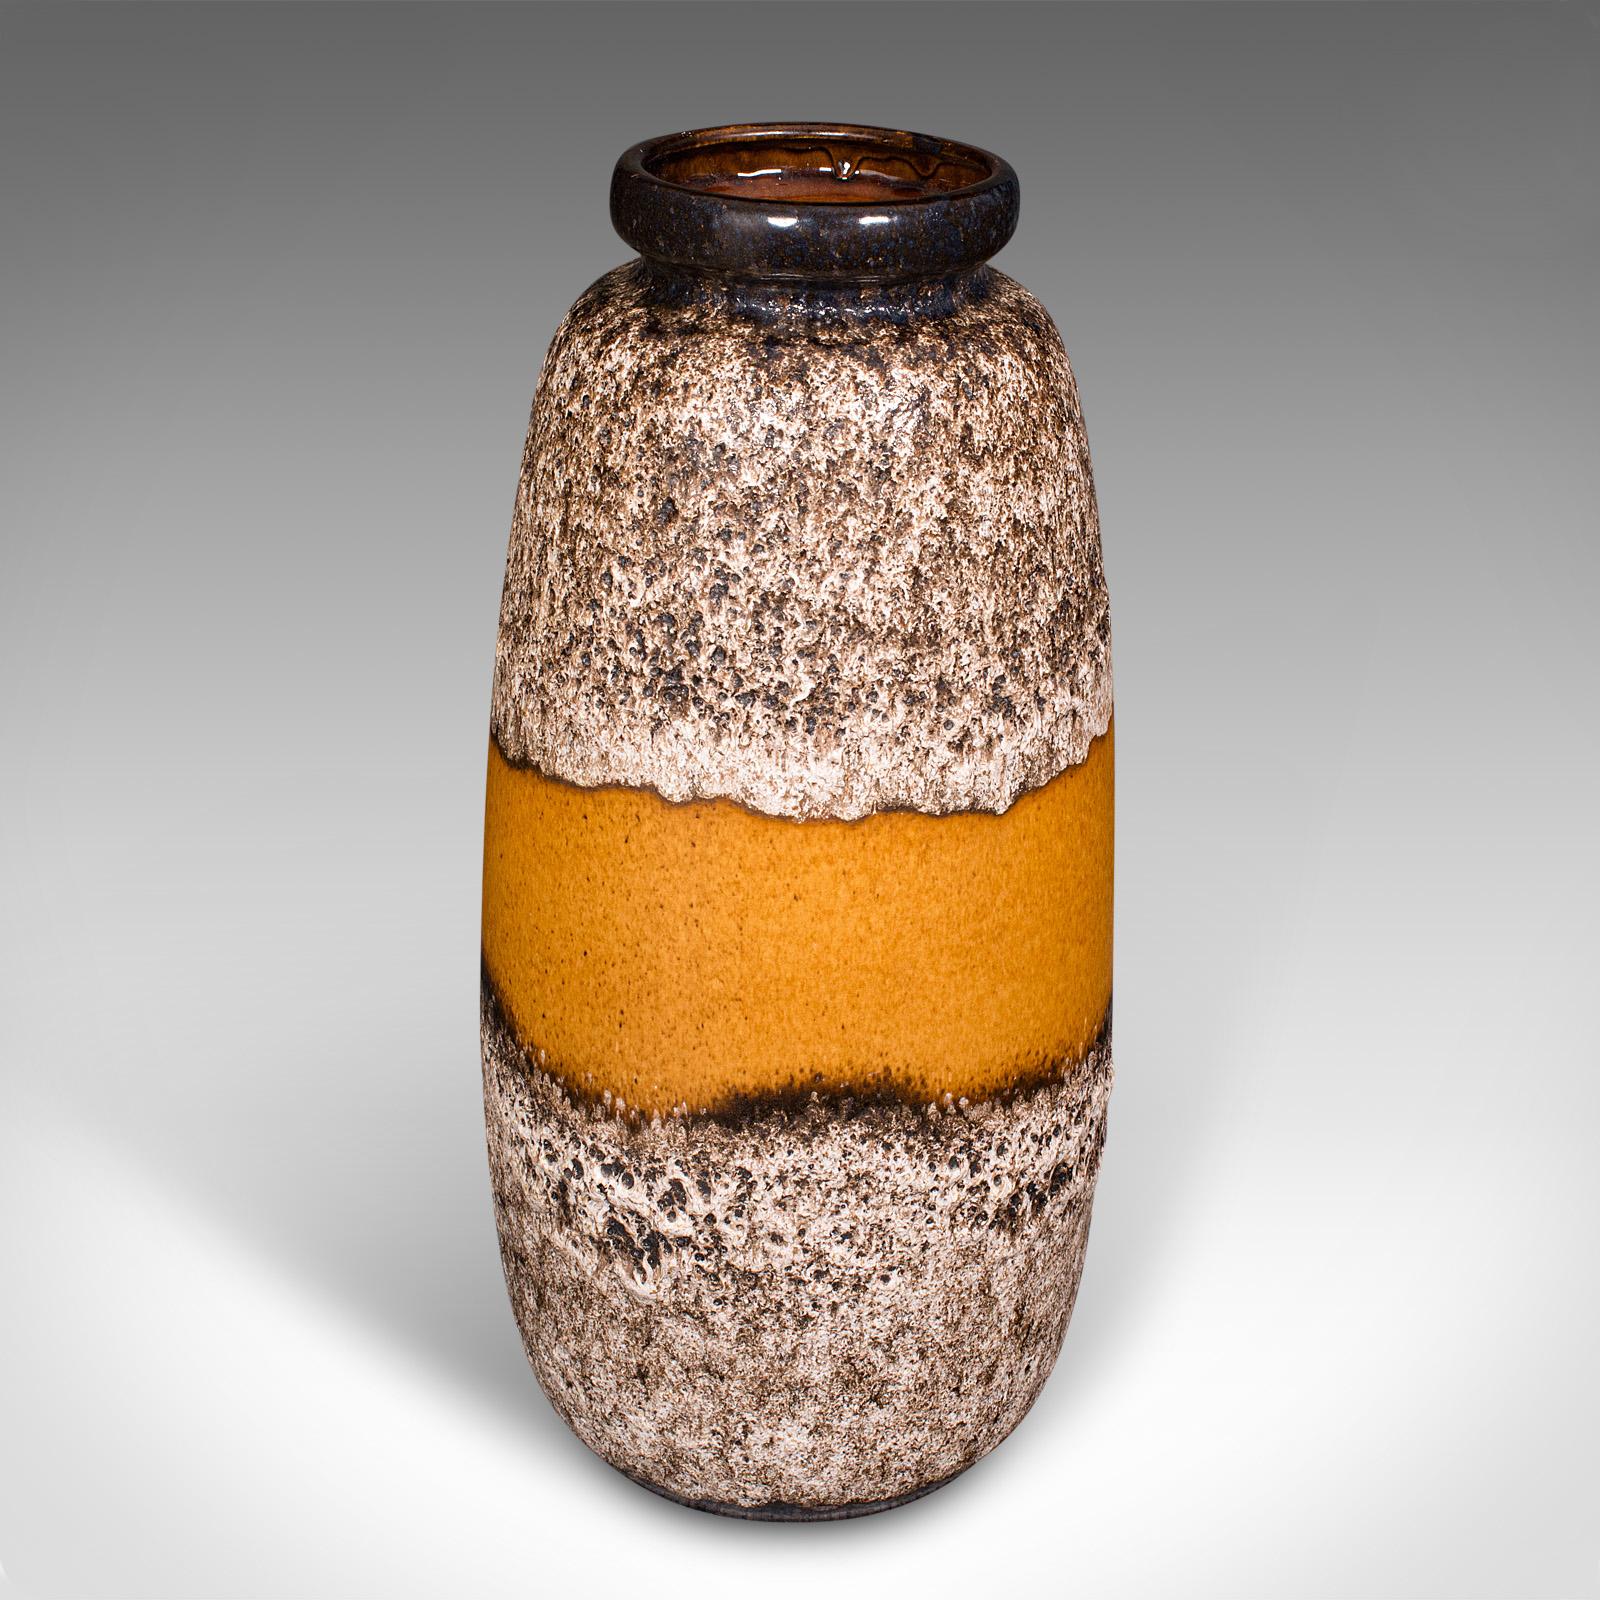 This is a vintage fat lava vase. A German, ceramic magma finish stick stand, dating to the mid 20th century, circa 1950.

Distinctive finish with appealing colour and of useful proportion for hall use
Displays a desirable aged patina and good